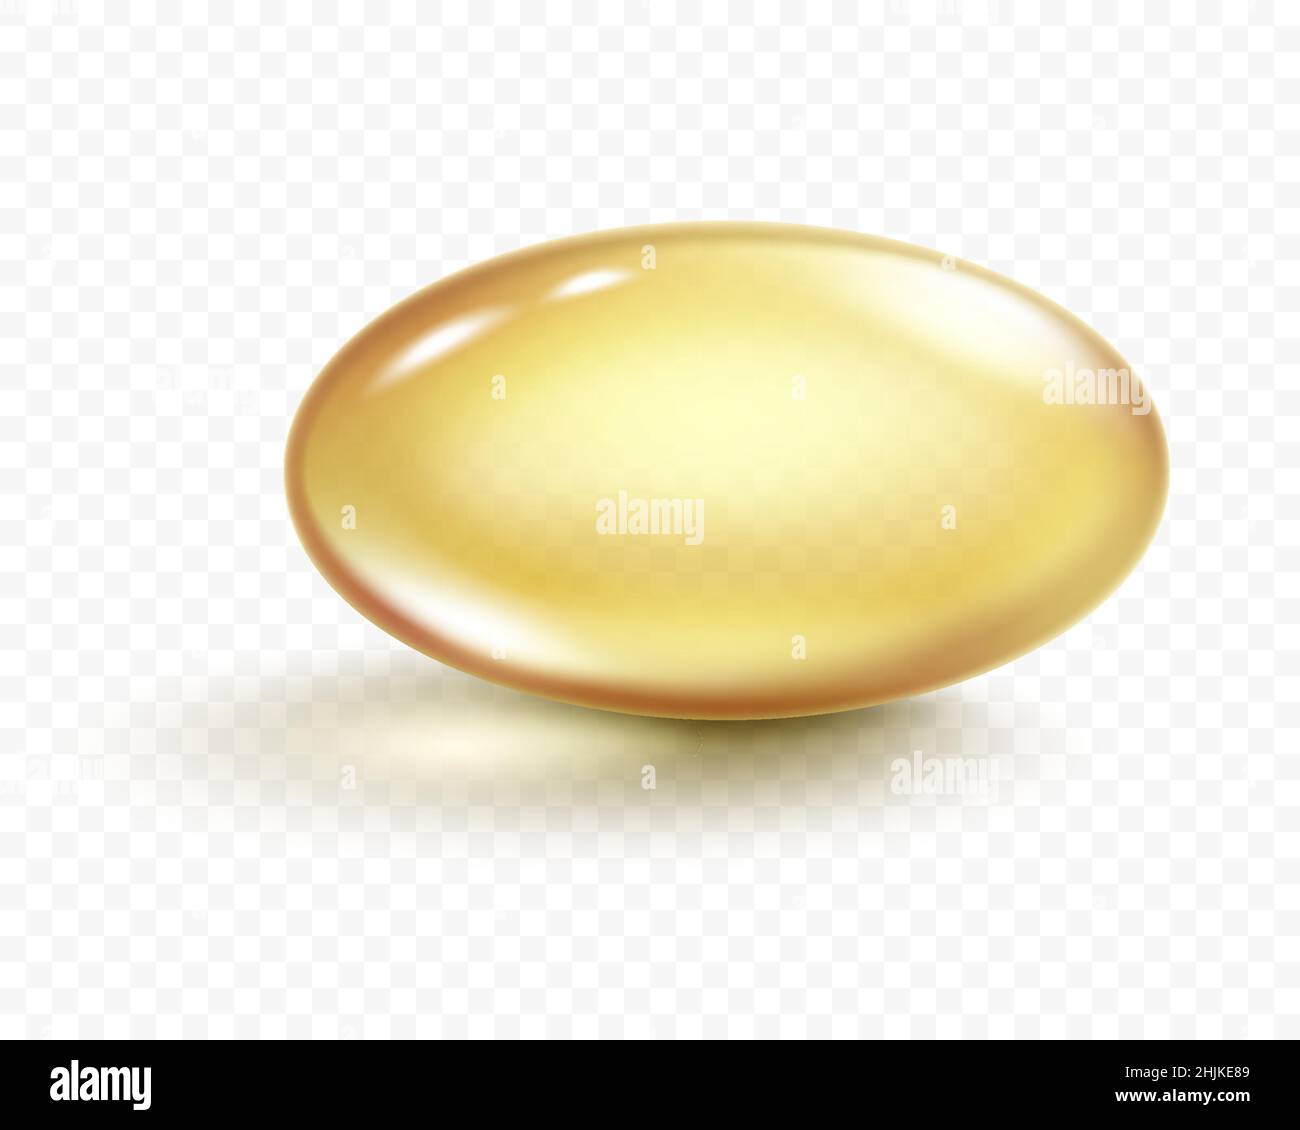 Vector Real fish oil capsule with transparency effect and shadow. Realistic medicine pills with fish oil or omega 3 vitamin supplement isolated on whi Stock Vector